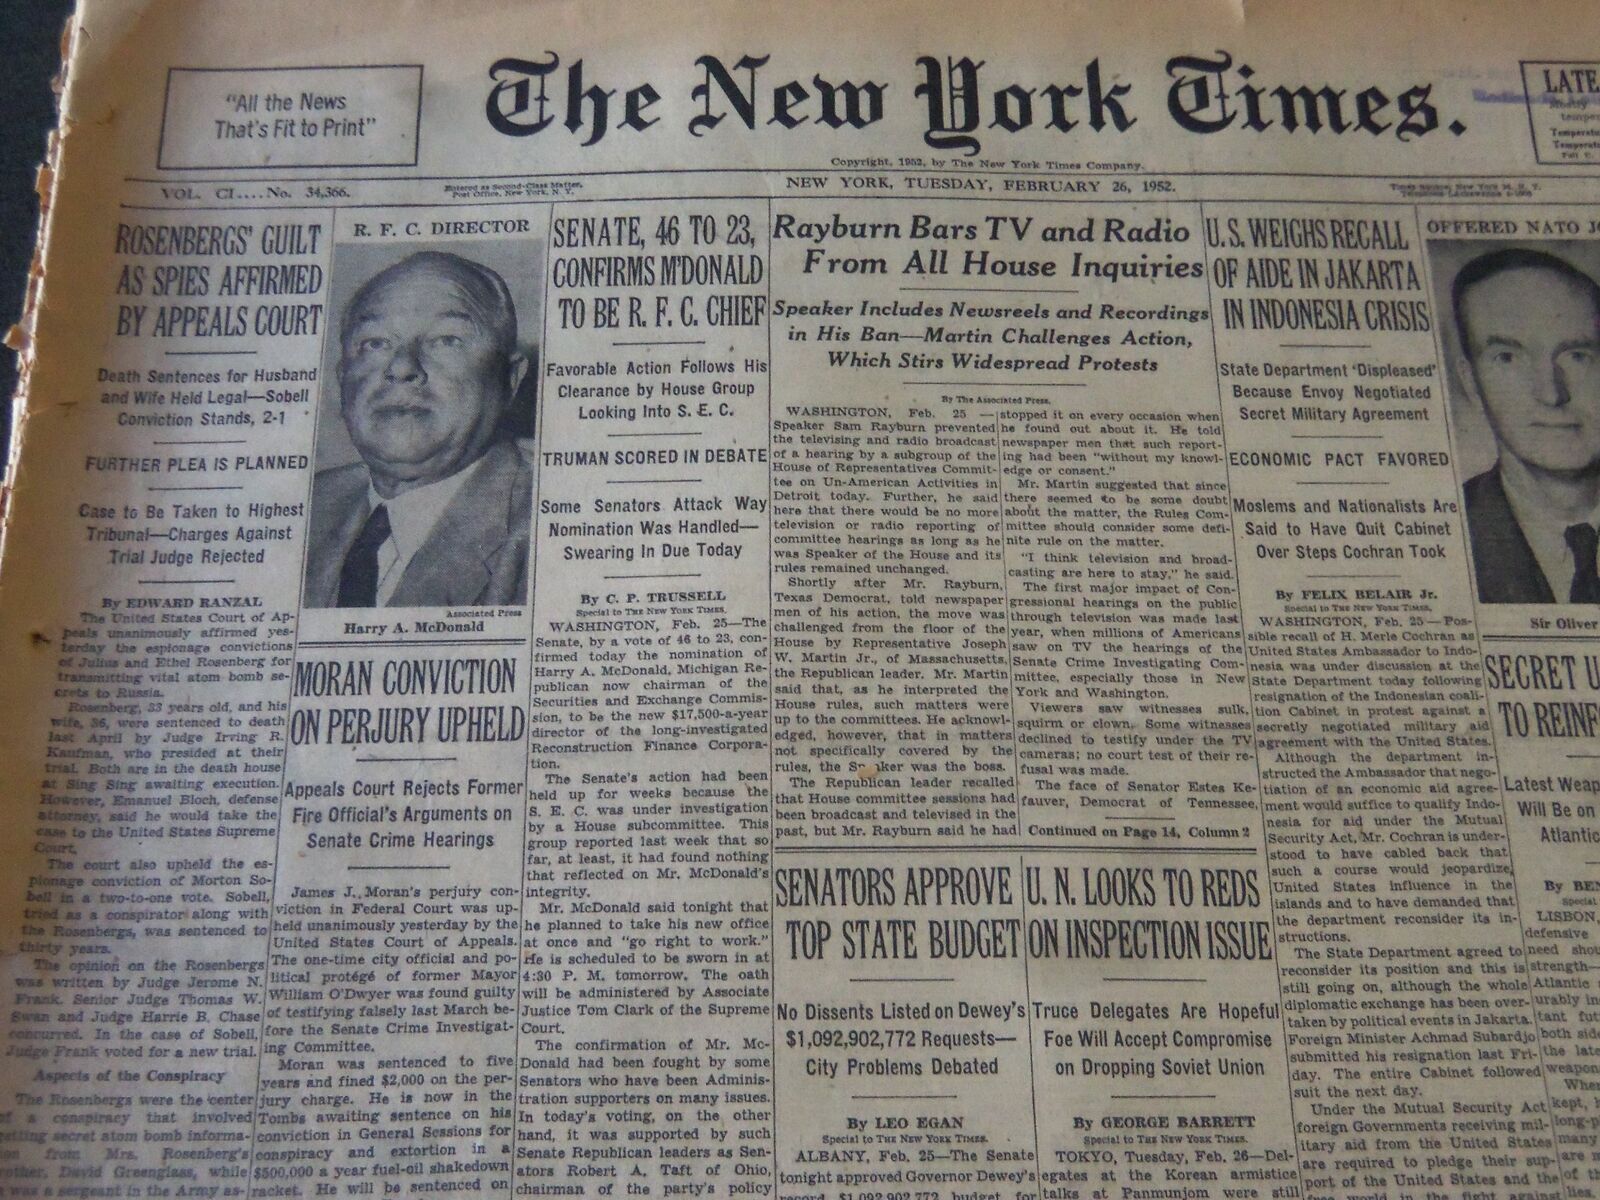 1952 FEB 26 NEW YORK TIMES ROSENBERGS GUILT AS SPIES AFFIRMED BY COURT - NT 5990